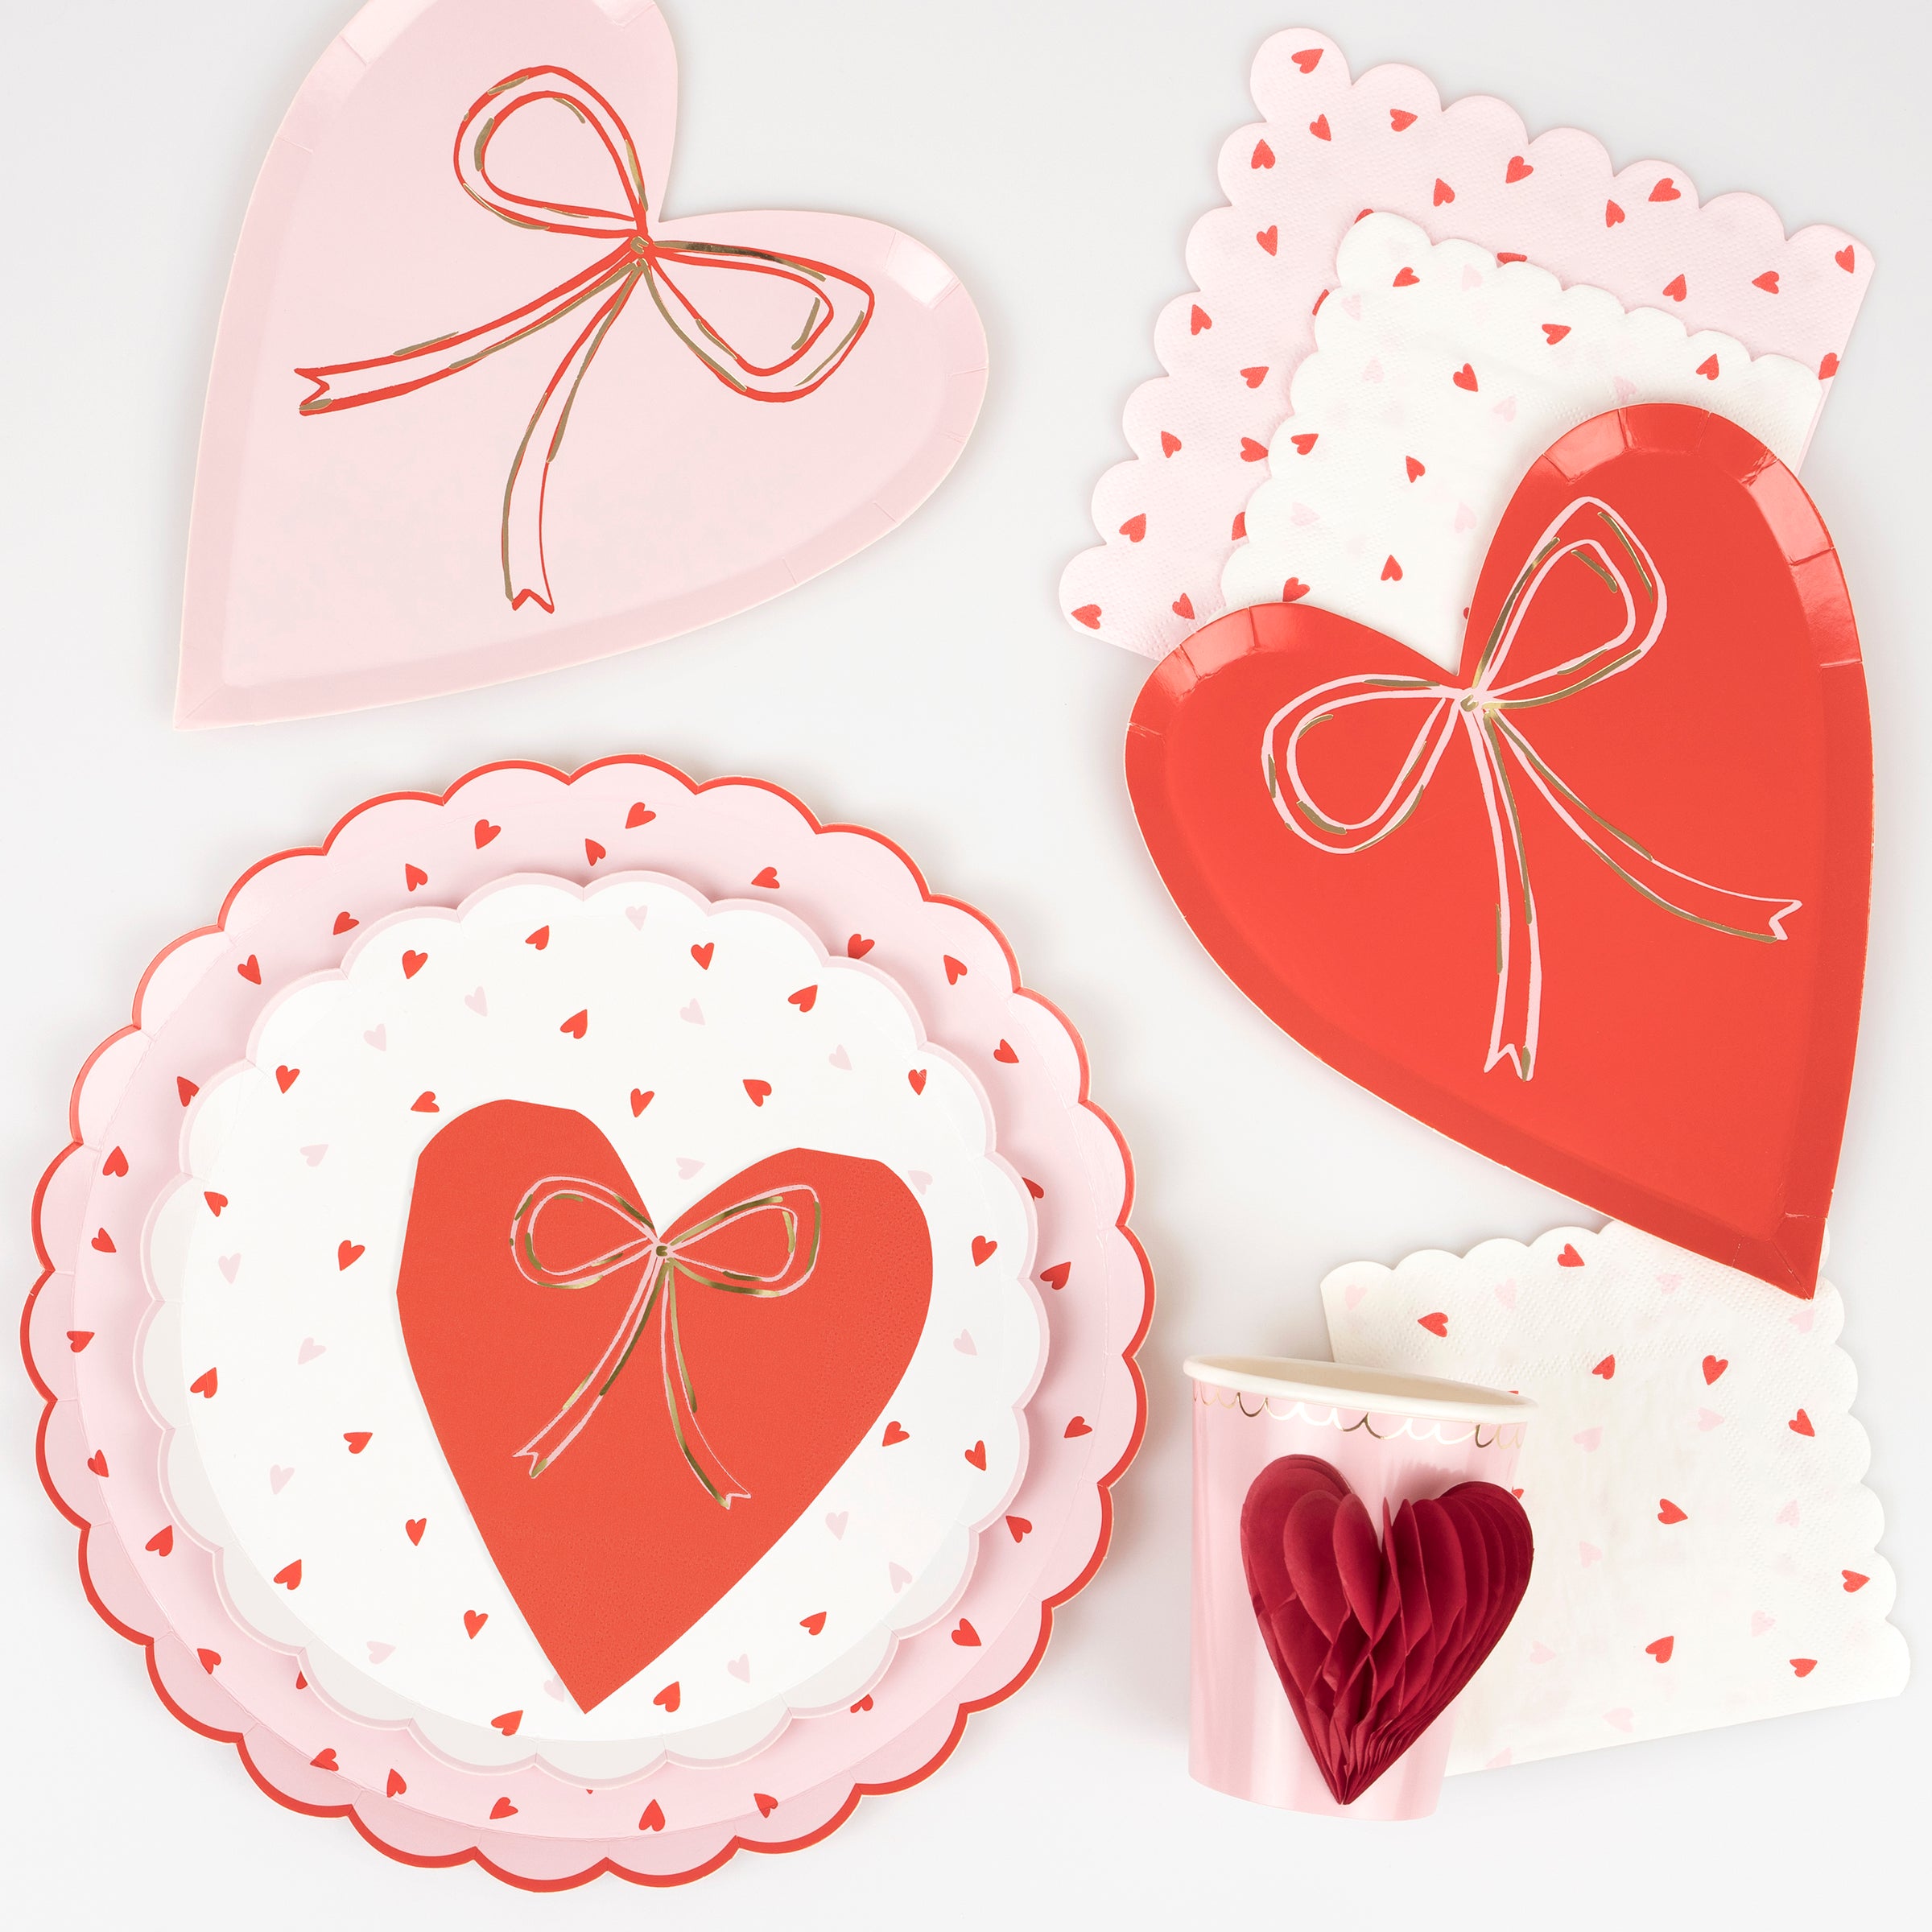 Our party plates, featuring red hearts, are perfect for a romantic meal.